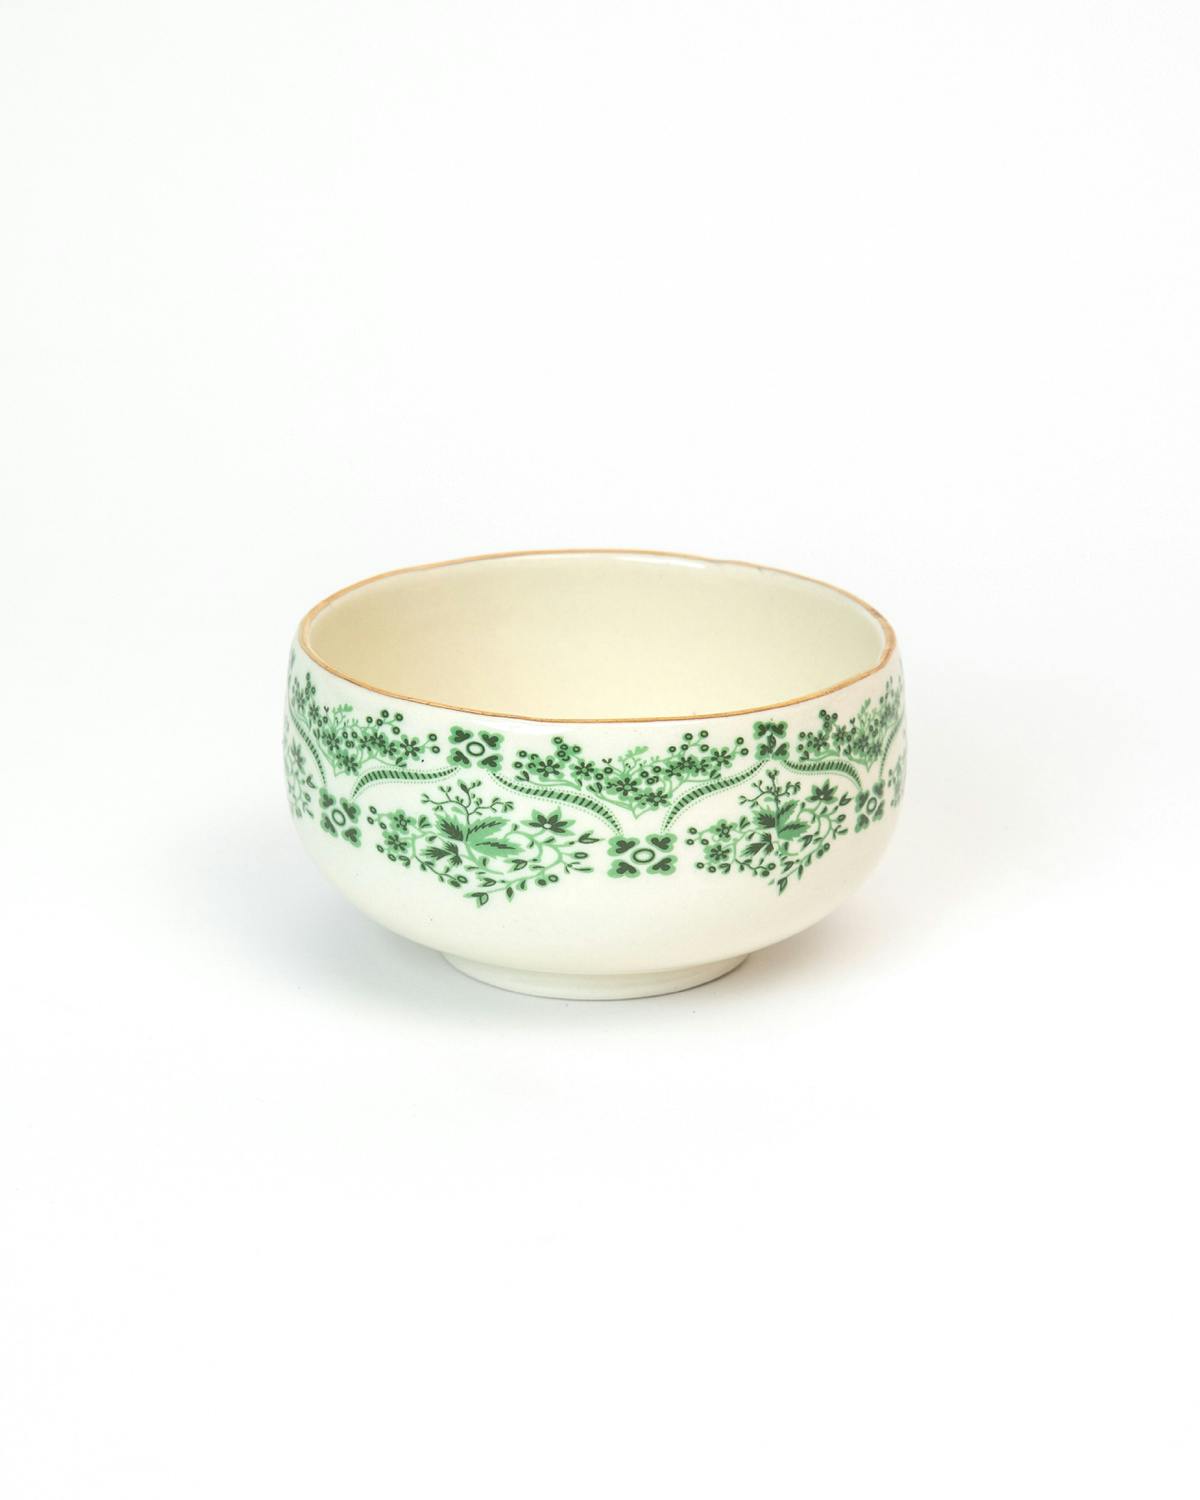 Small Bowl, Green Lace. Image #4